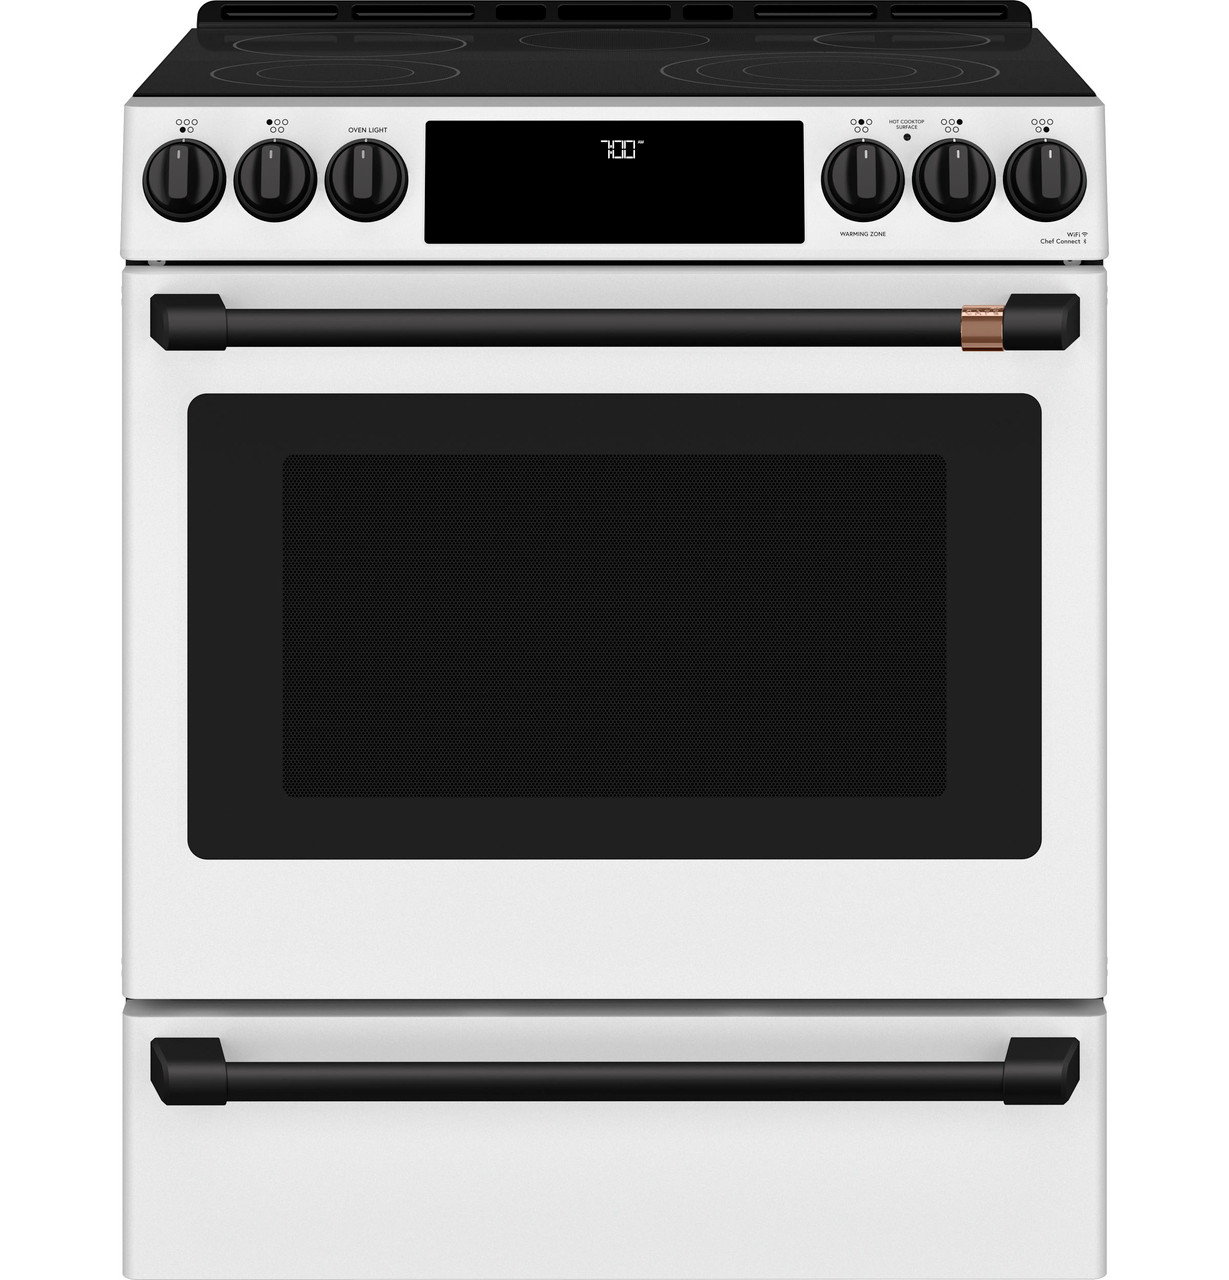 TANDEM 2000W Infrared Cooktop, Touch Controls